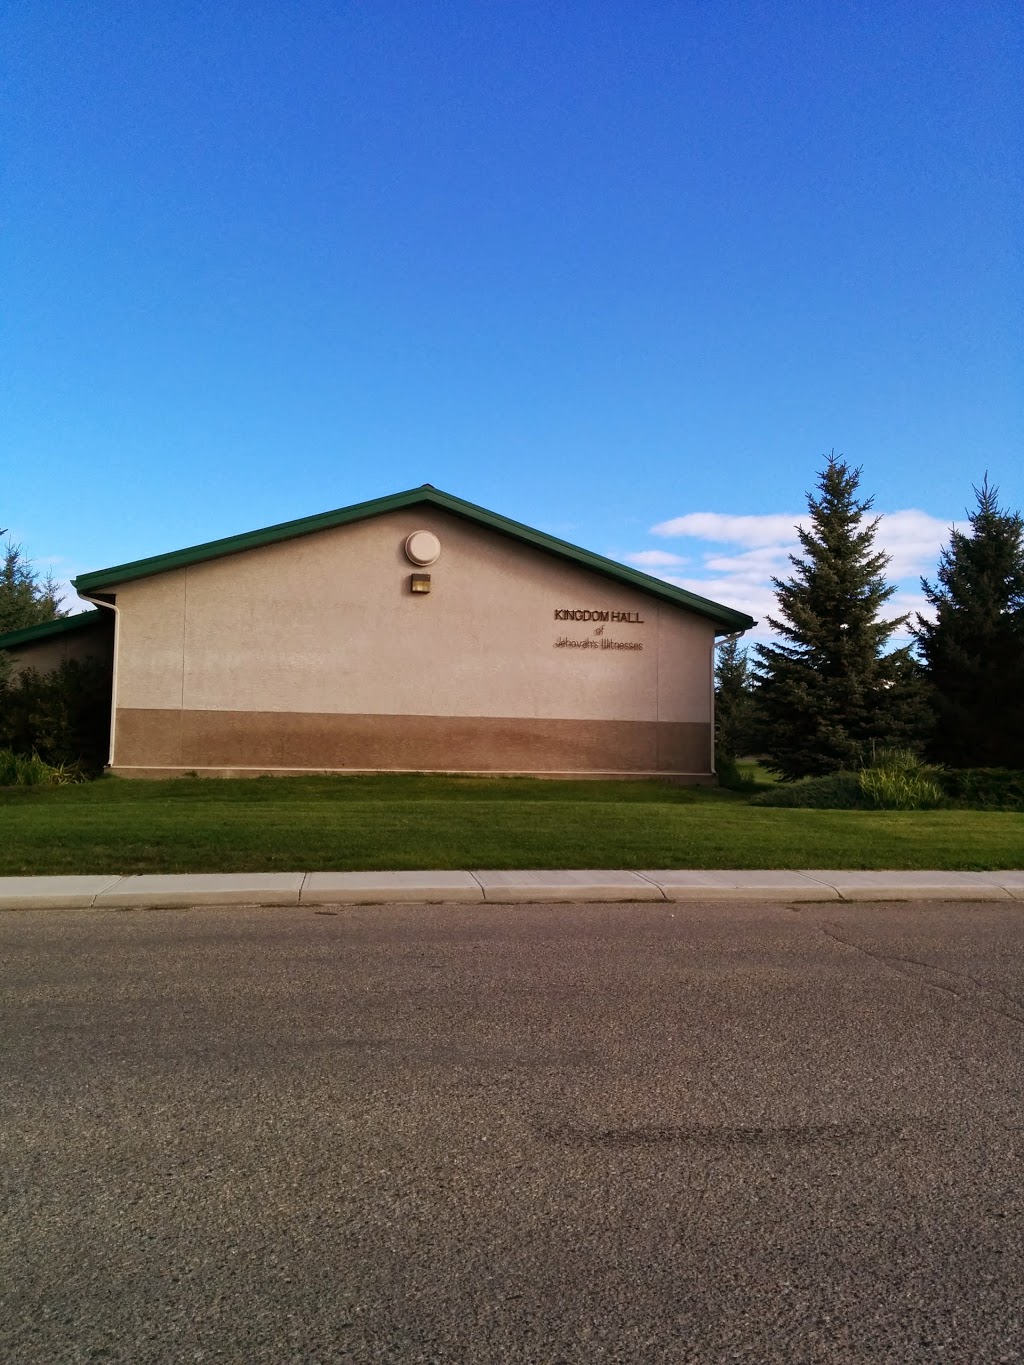 Kingdom Hall of Jehovahs Witnesses | church | 1 Bayside Pl, Strathmore, AB T1P 1C8, Canada | 4039343427 OR +1 403-934-3427